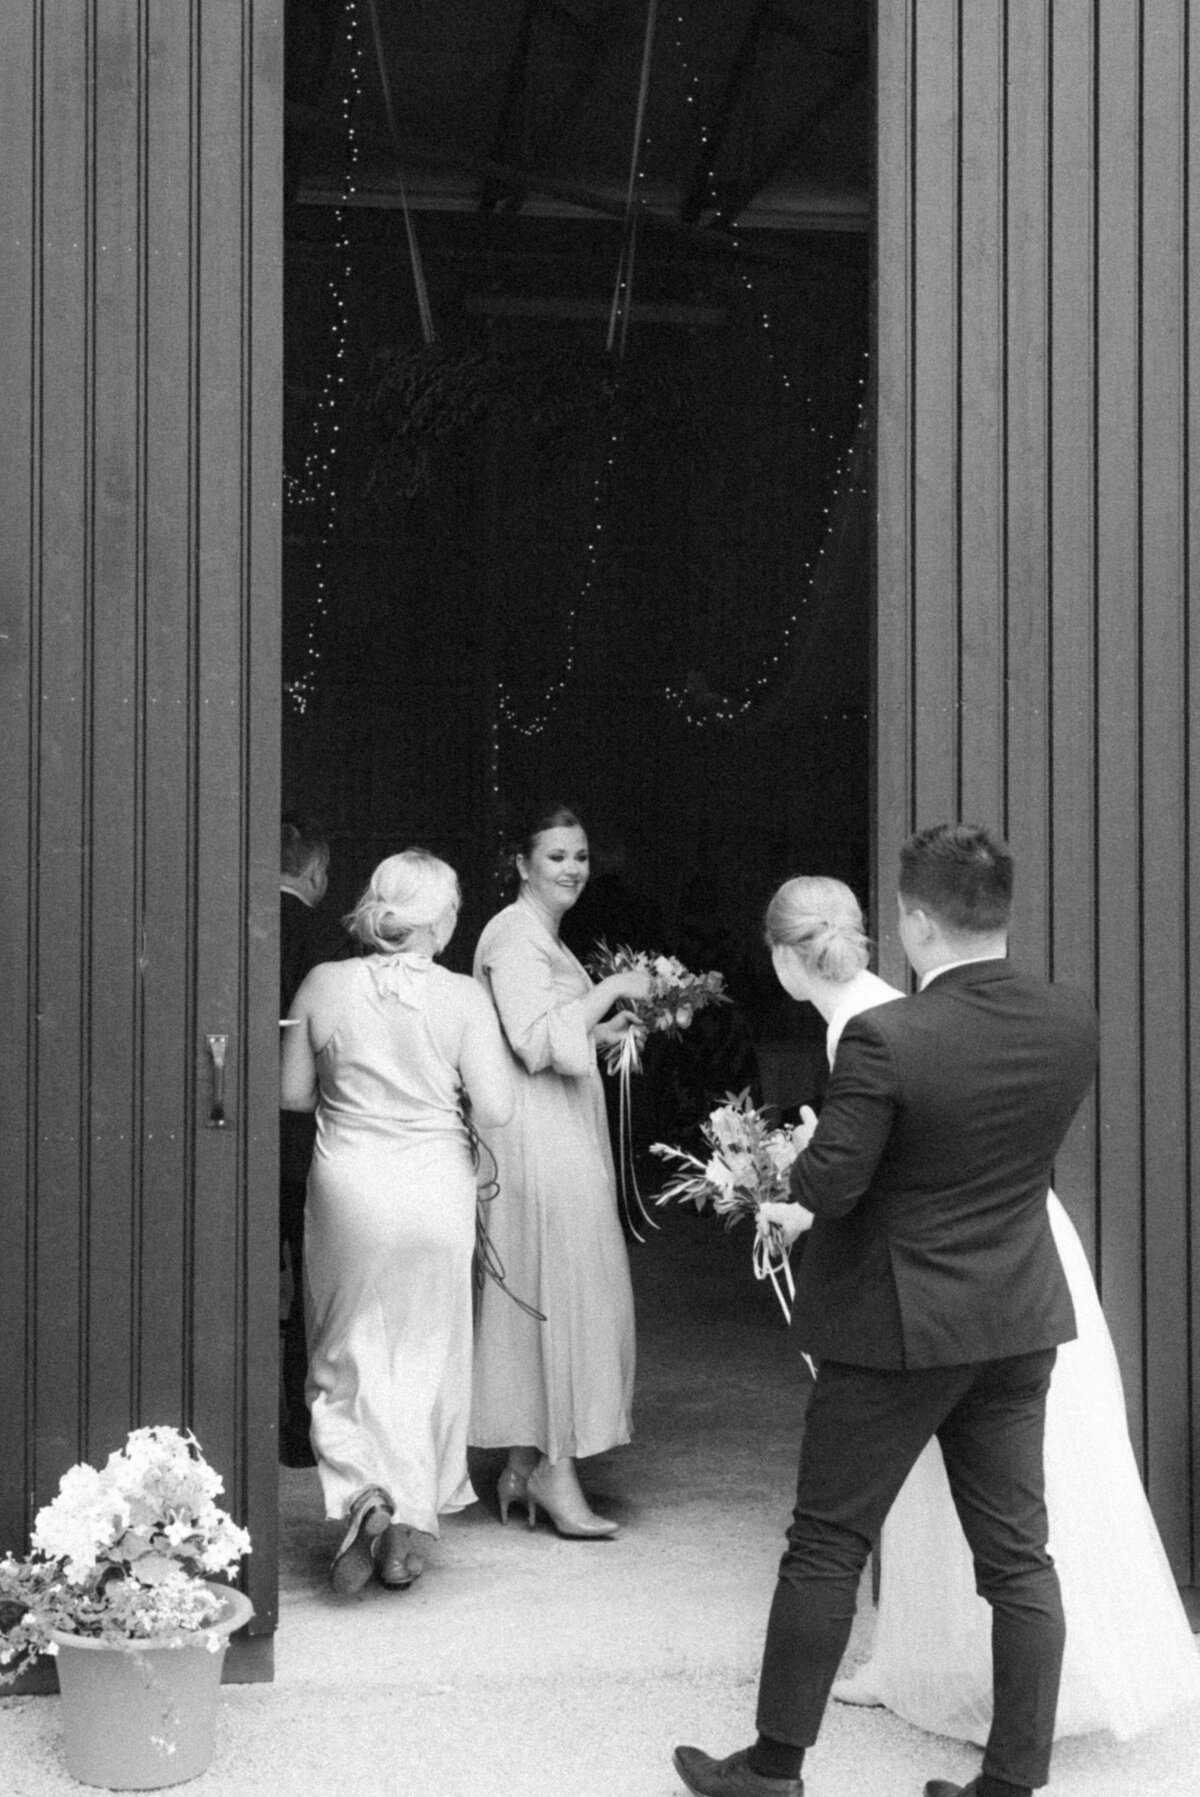 Guests in front of the wedding venue photographed by wedding photographer Hannika Gabrielsson